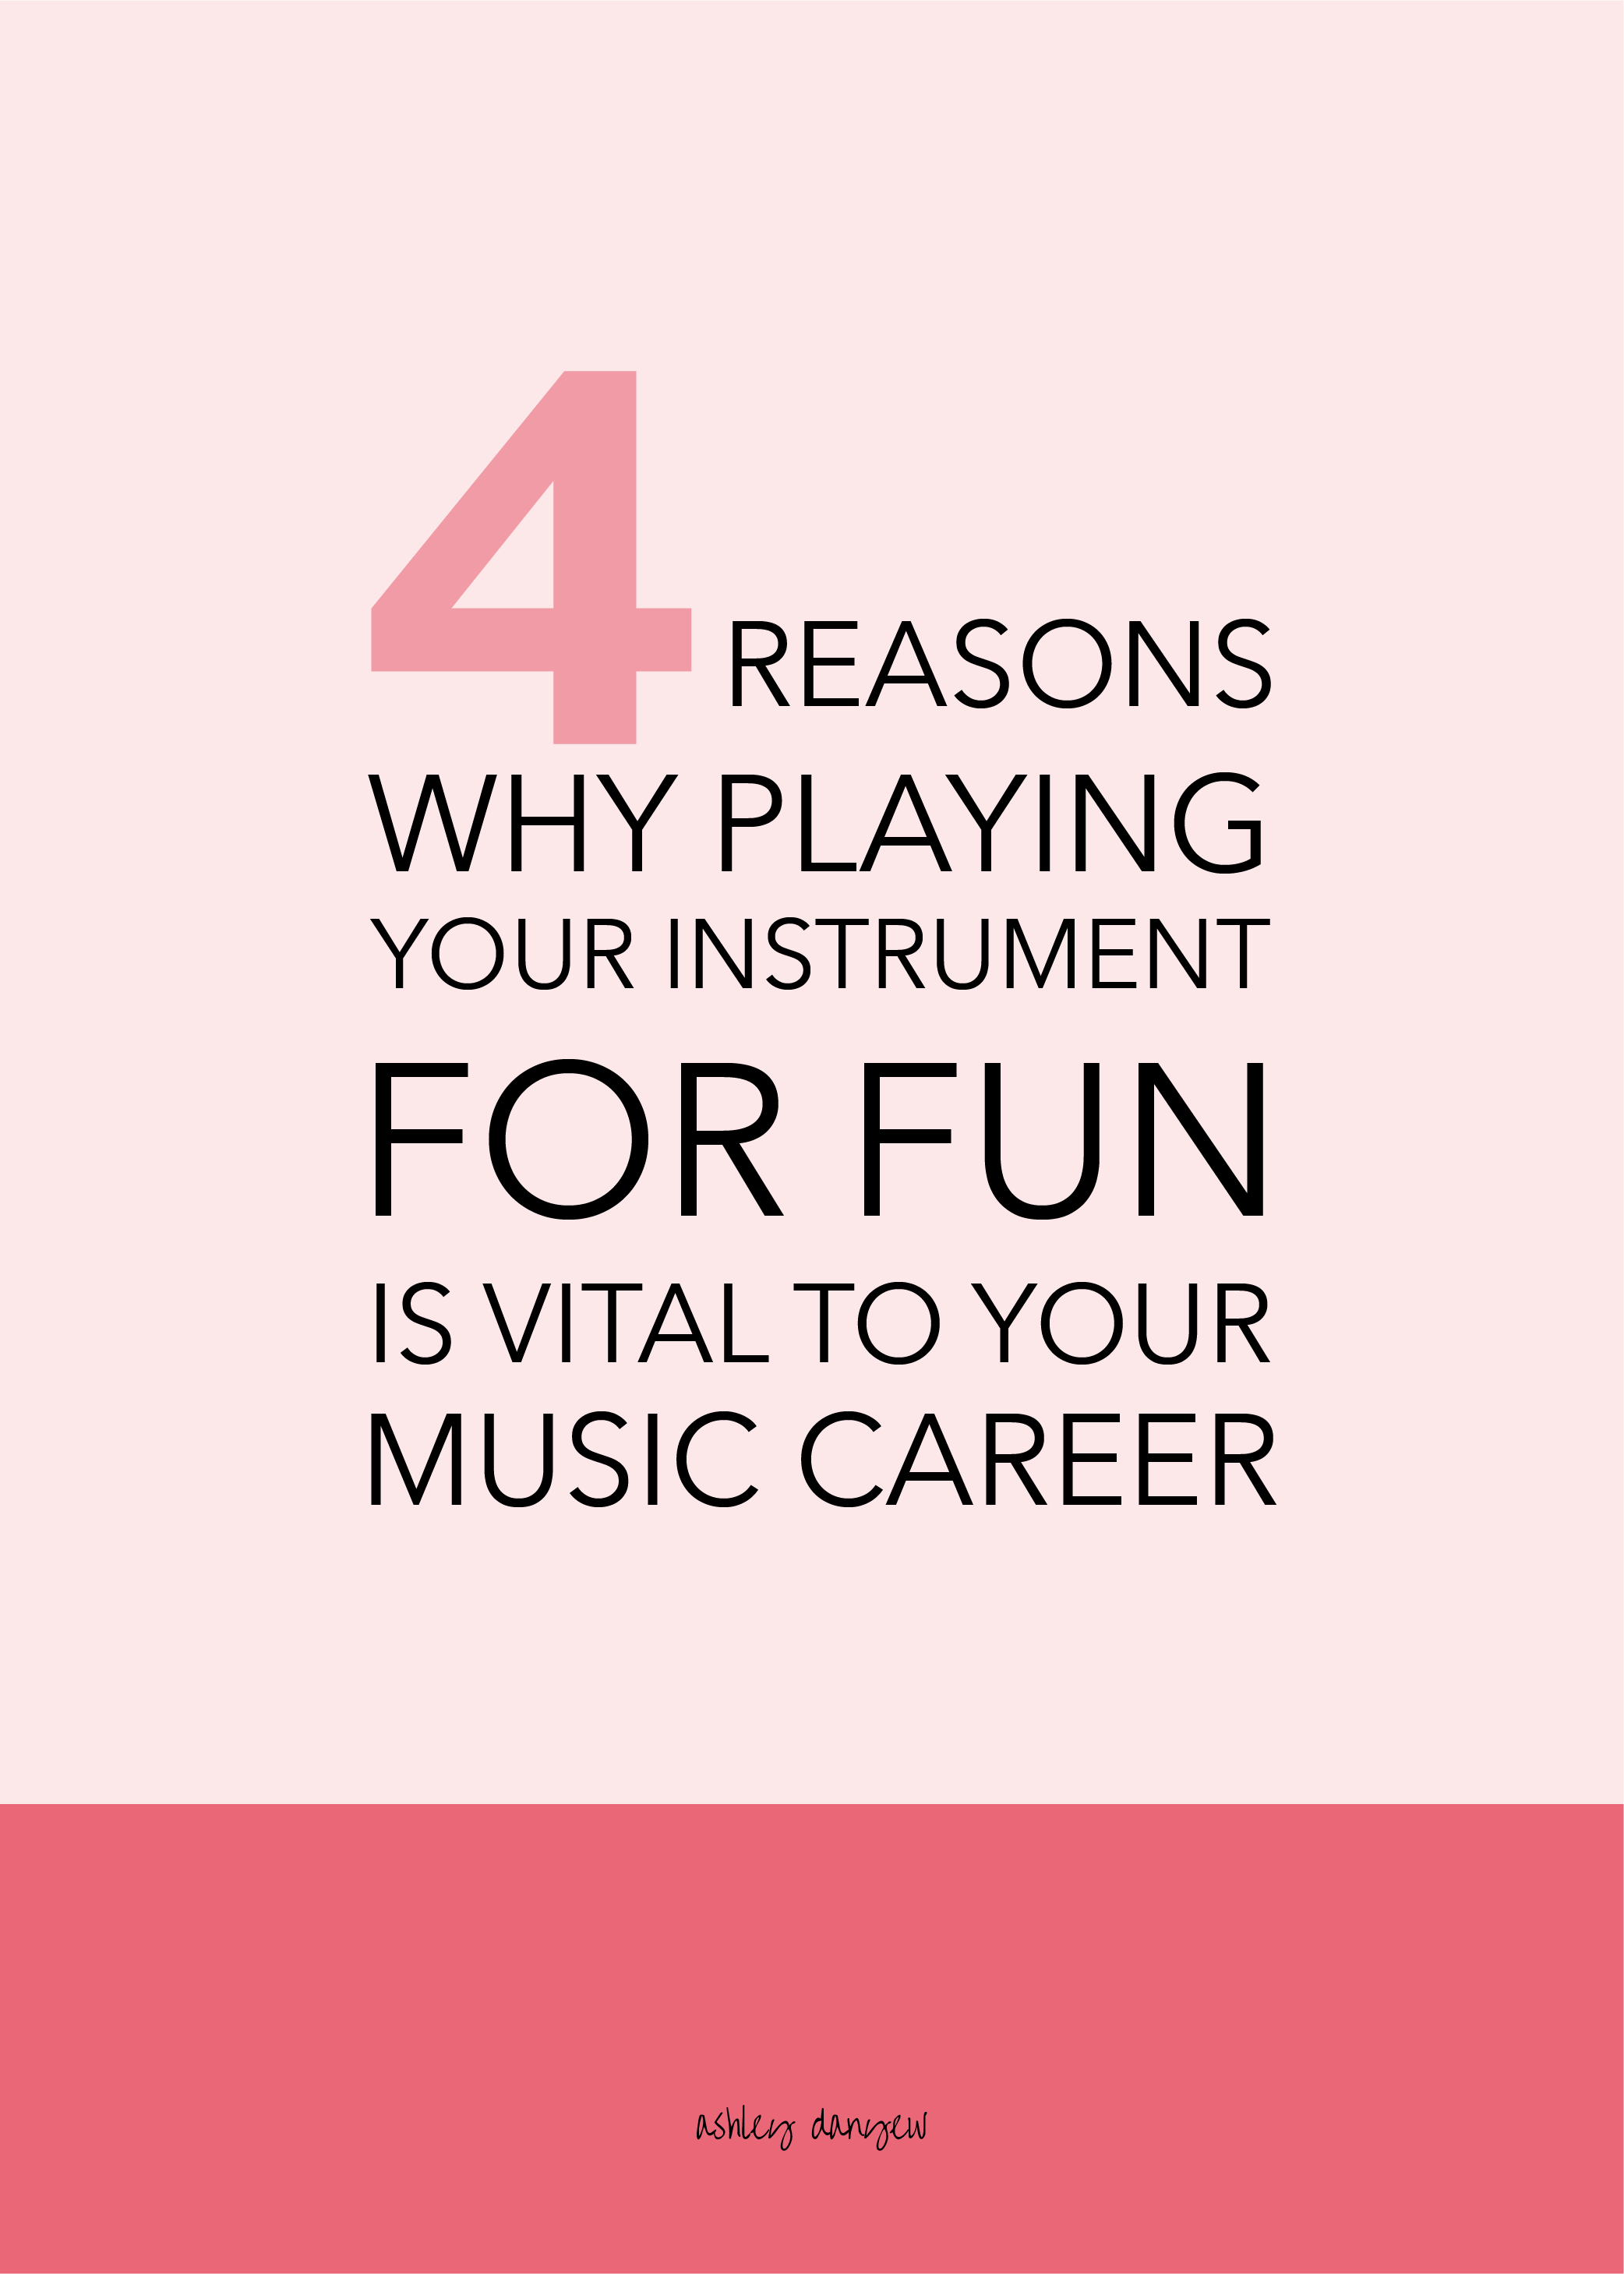 Copy of Four Reasons Why Playing Your Instrument for Fun is Vital to Your Music Career